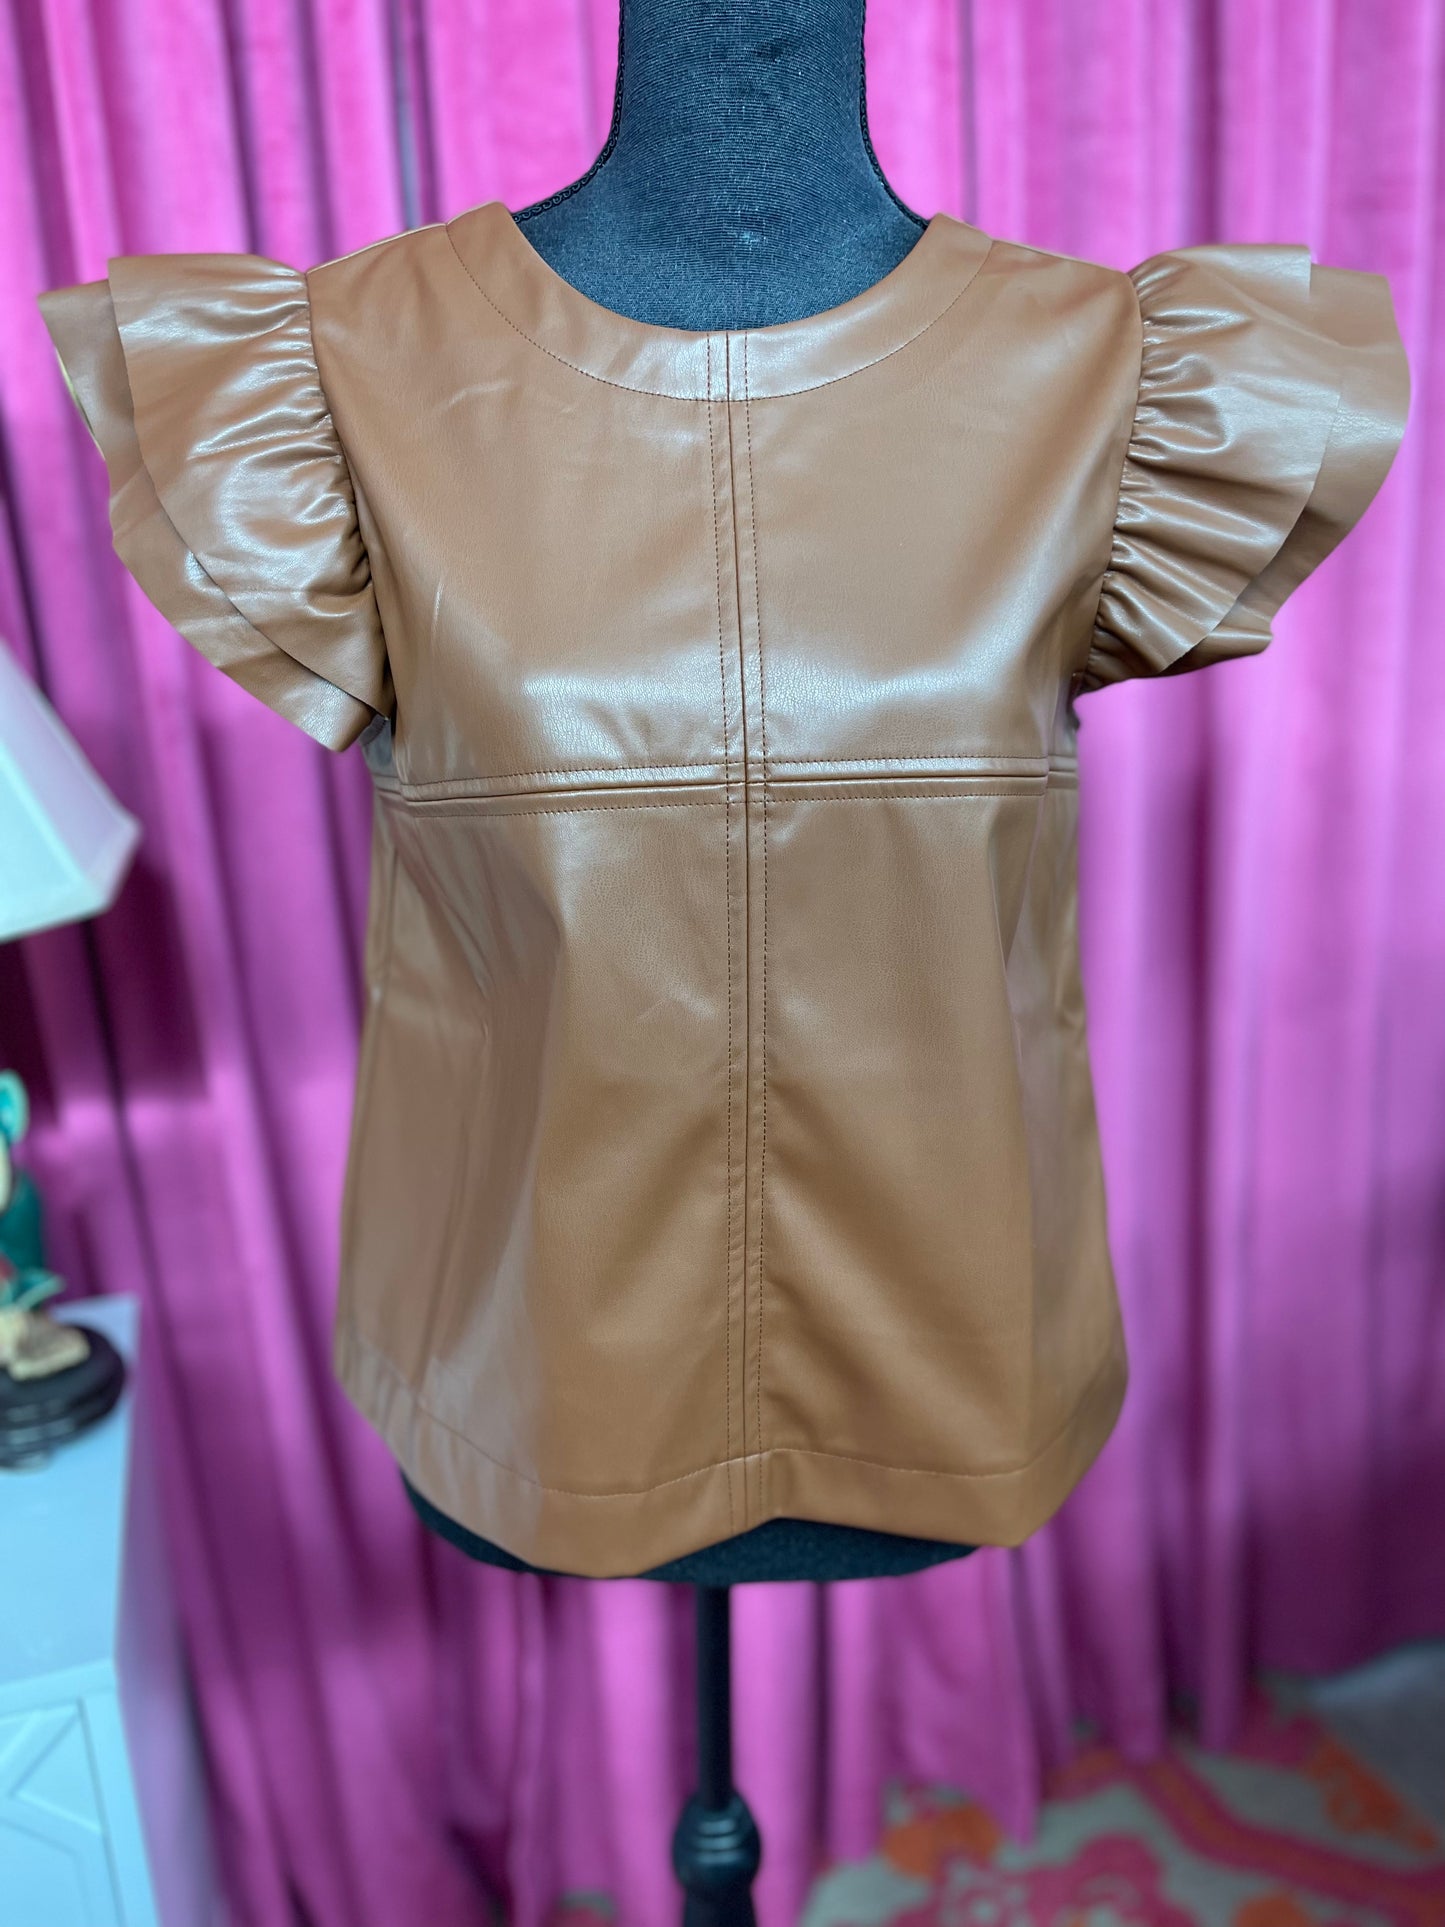 The Pleather Top